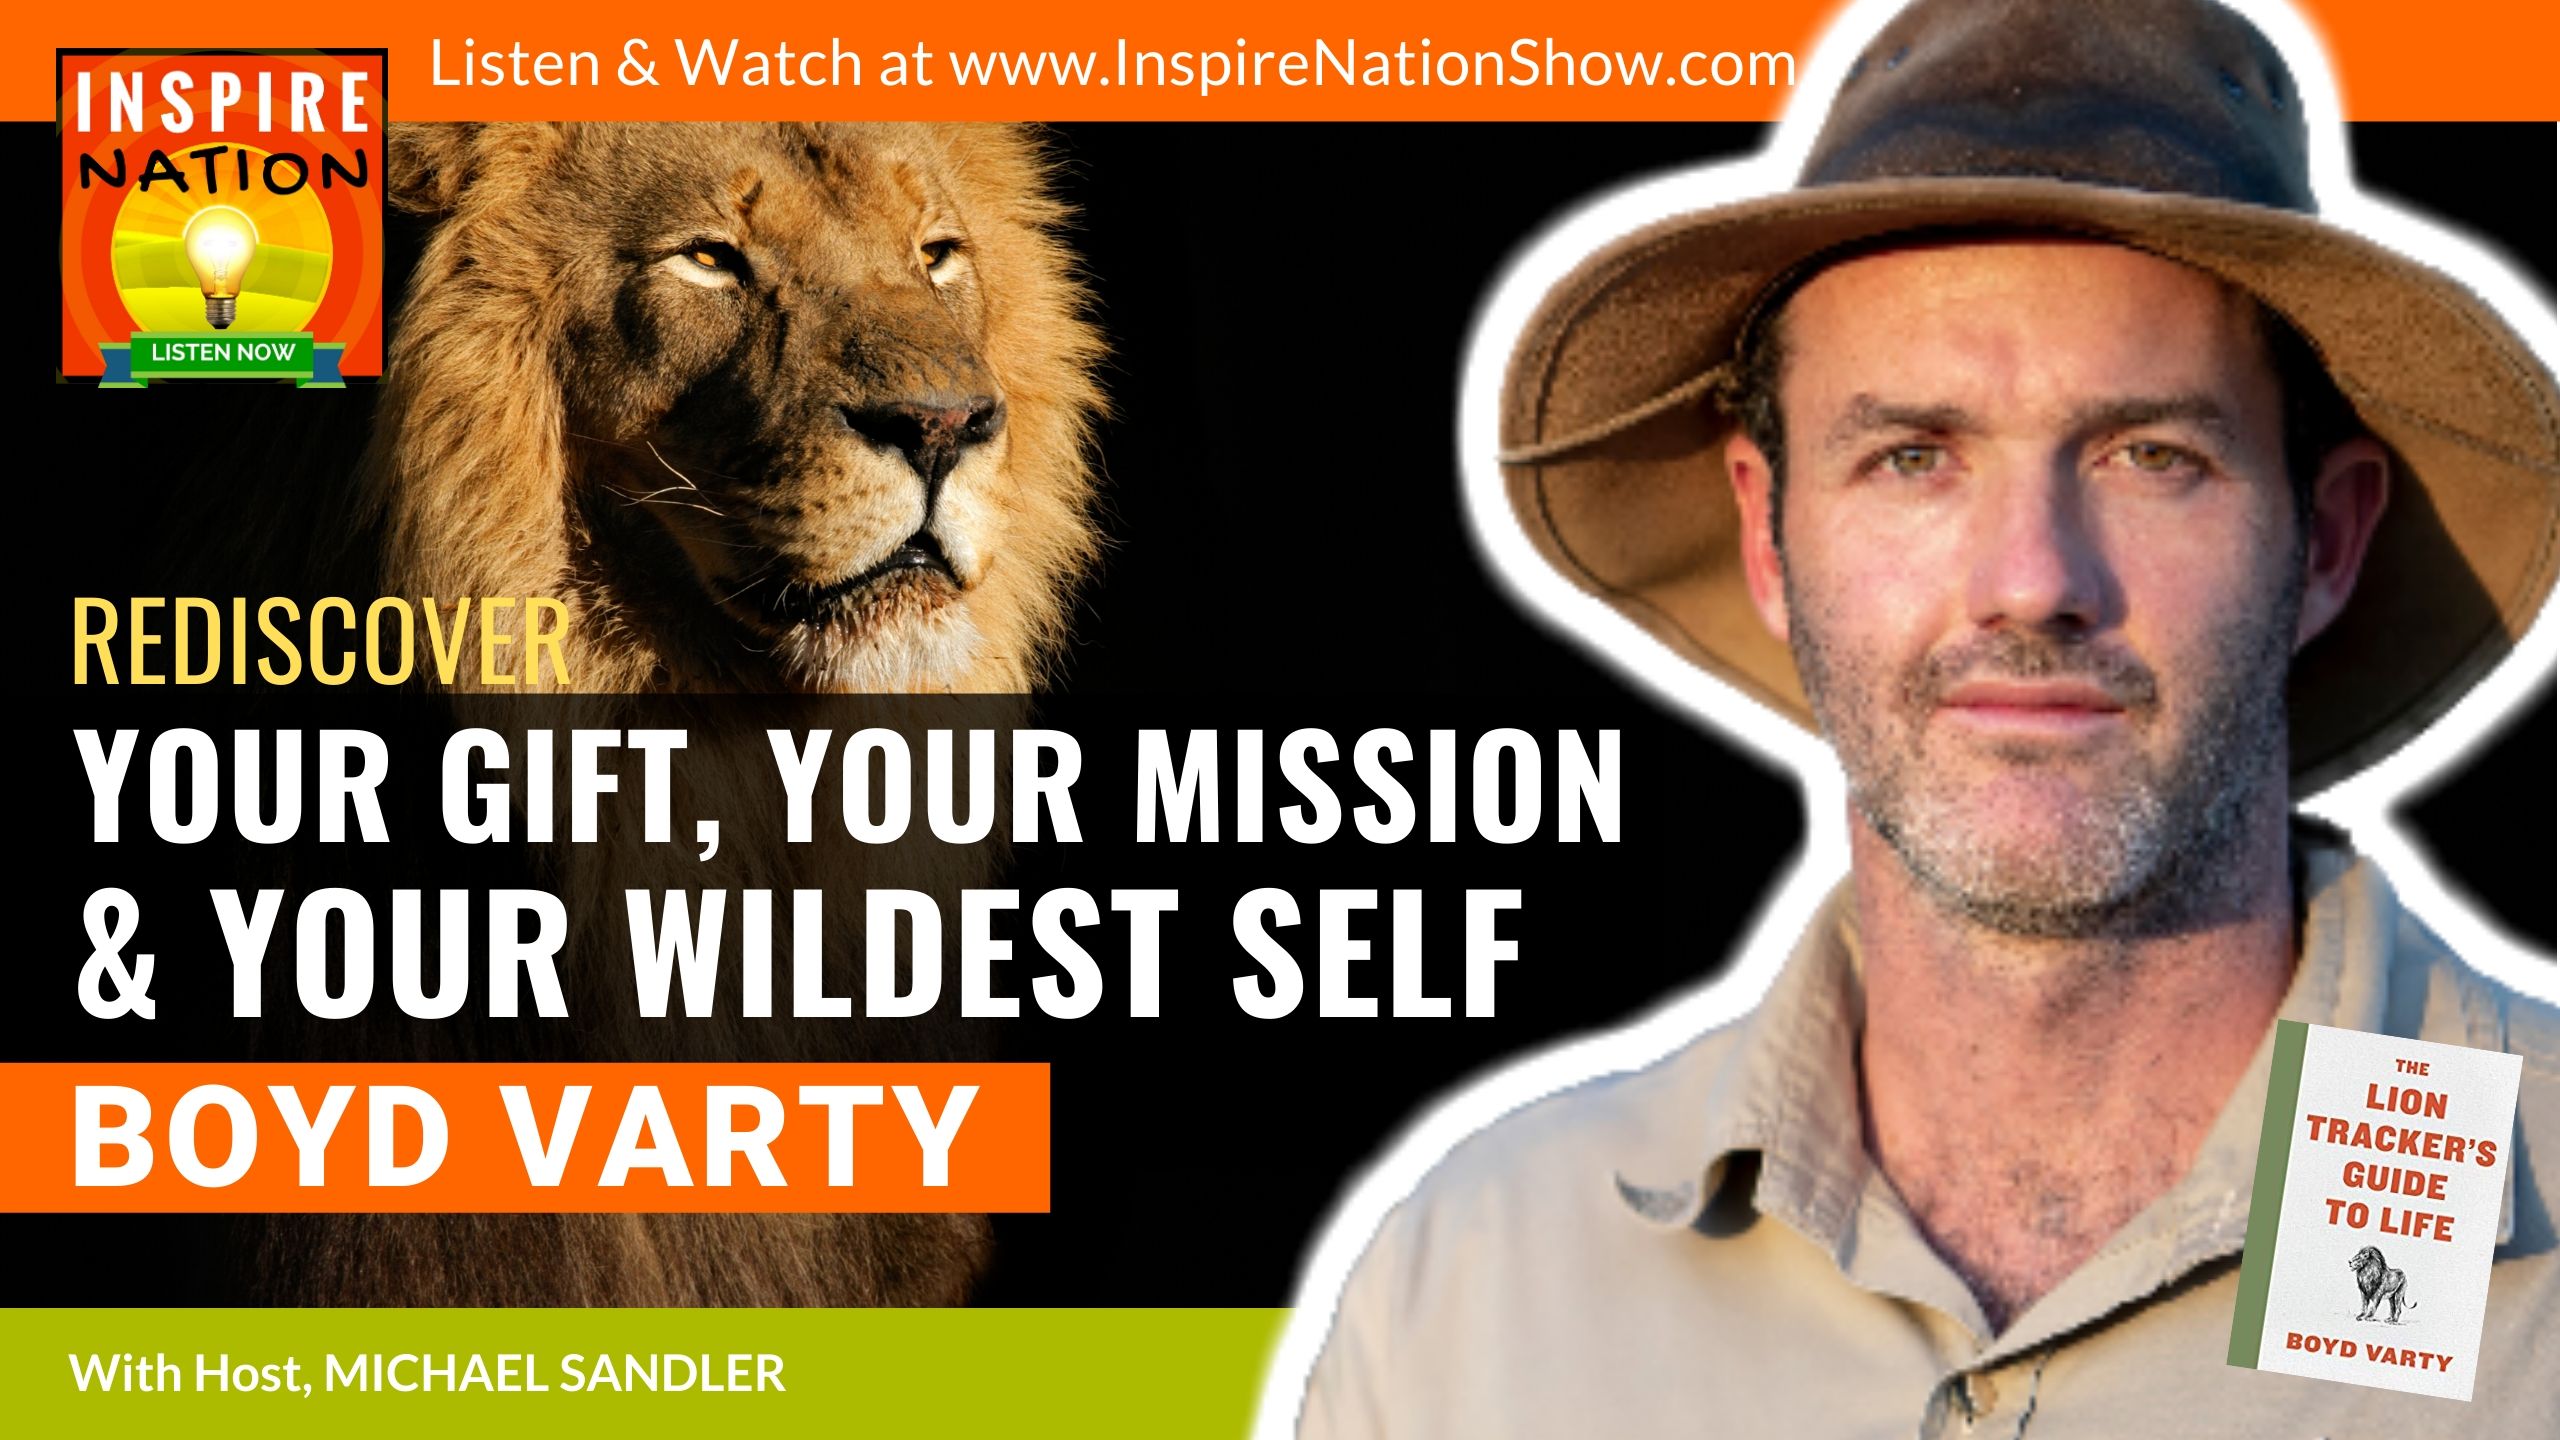 Michael Sandler interviews Boyd Varty on The Lion Tracker's Guide to Life and how you can discover your wildest, most authentic self!